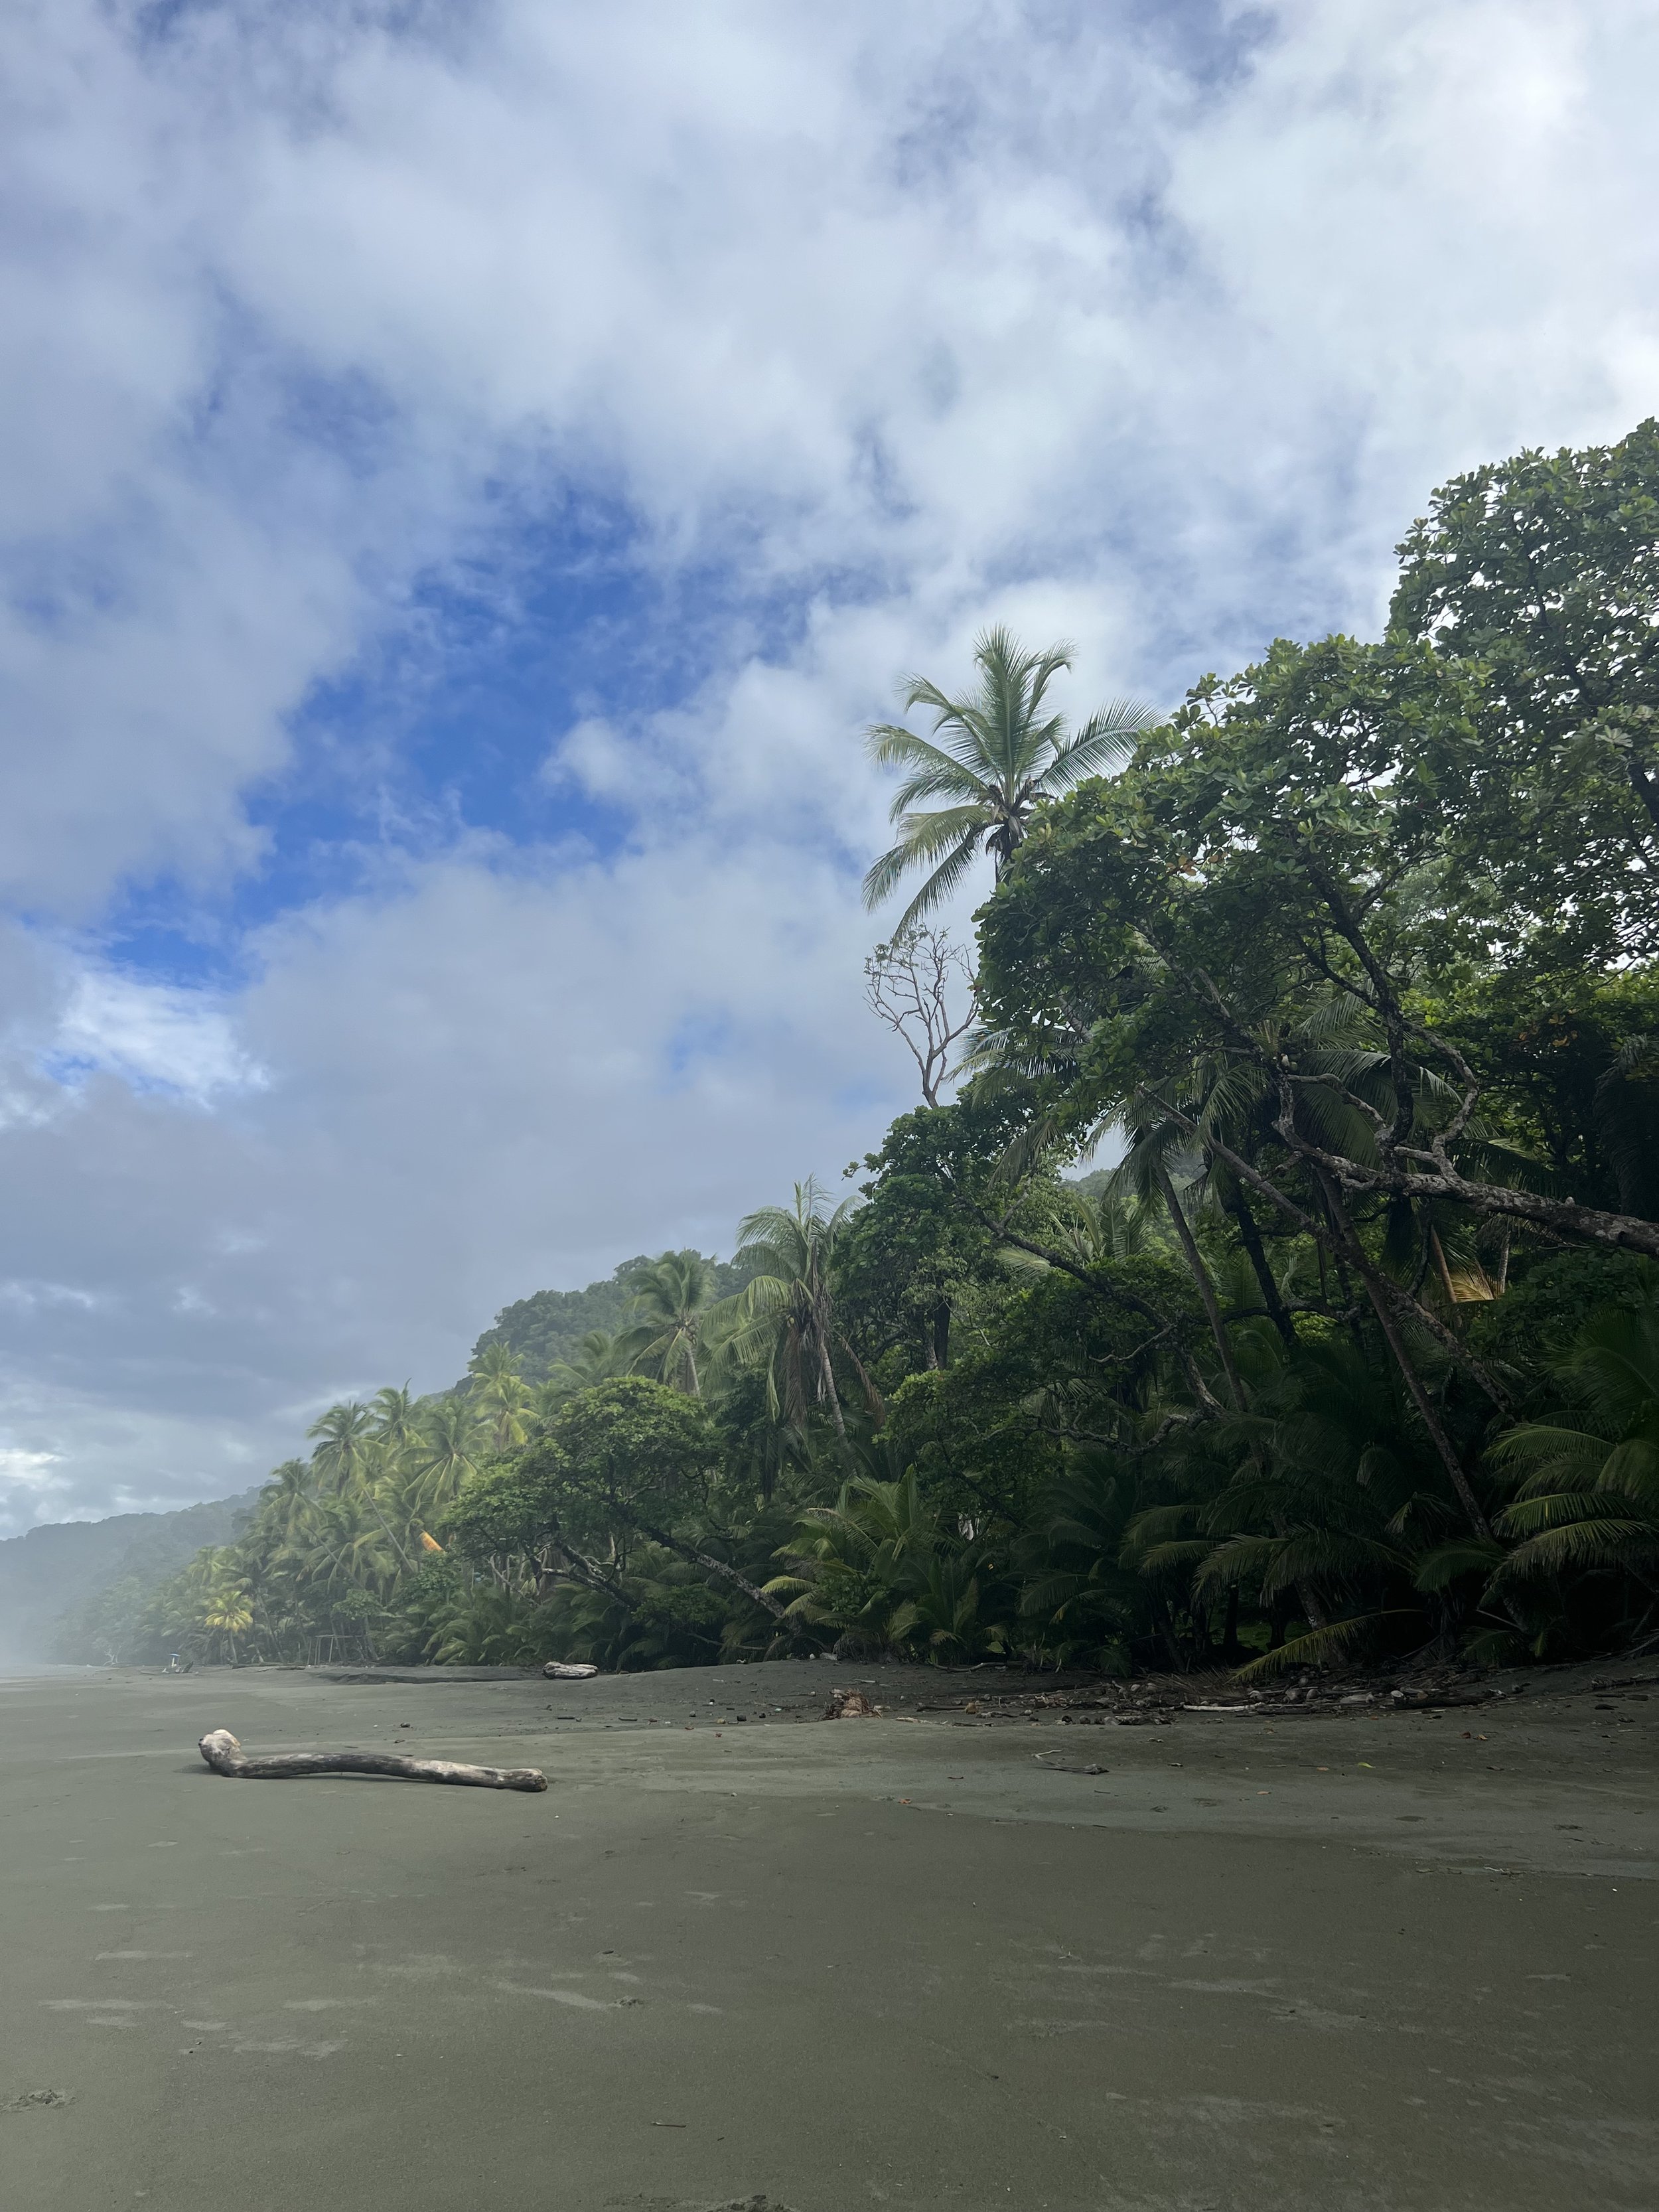  A glimpse into the beautiful beaches of the Osa Peninsula of Costa Rica, where a large portion of this research took place. 